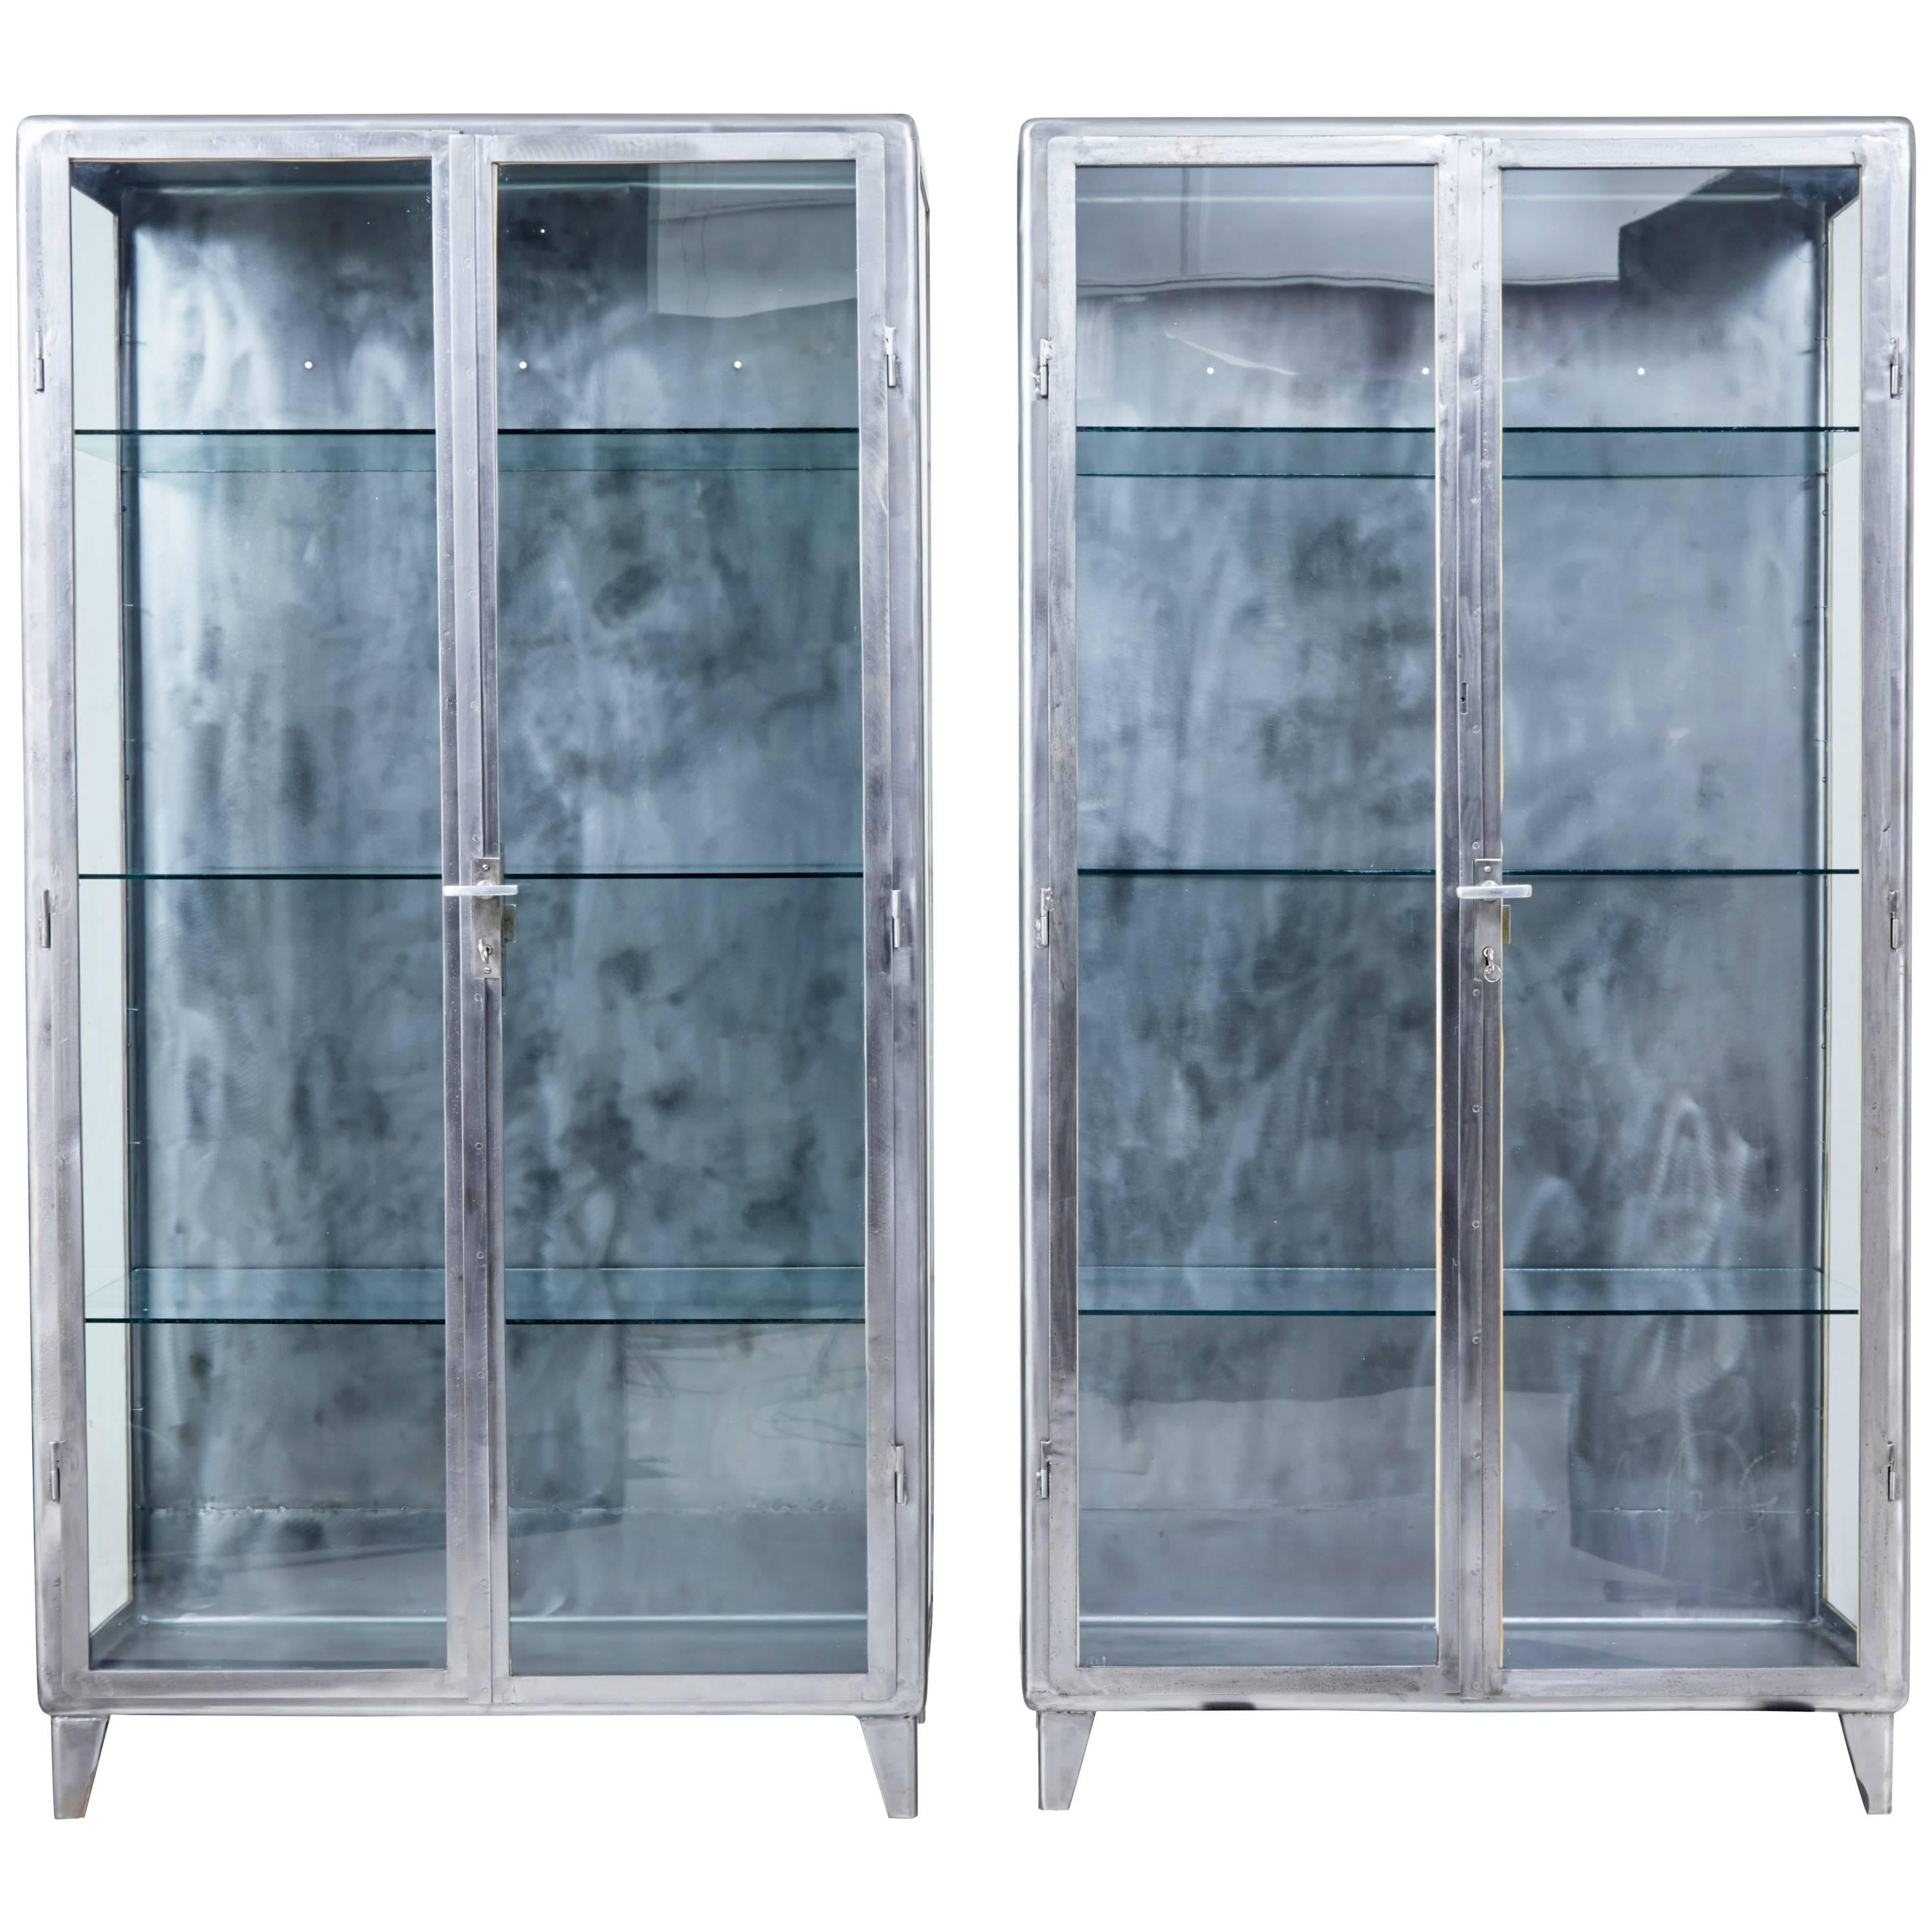 Pair of 1920s Art Deco Polished Steel Medical Display Cabinets